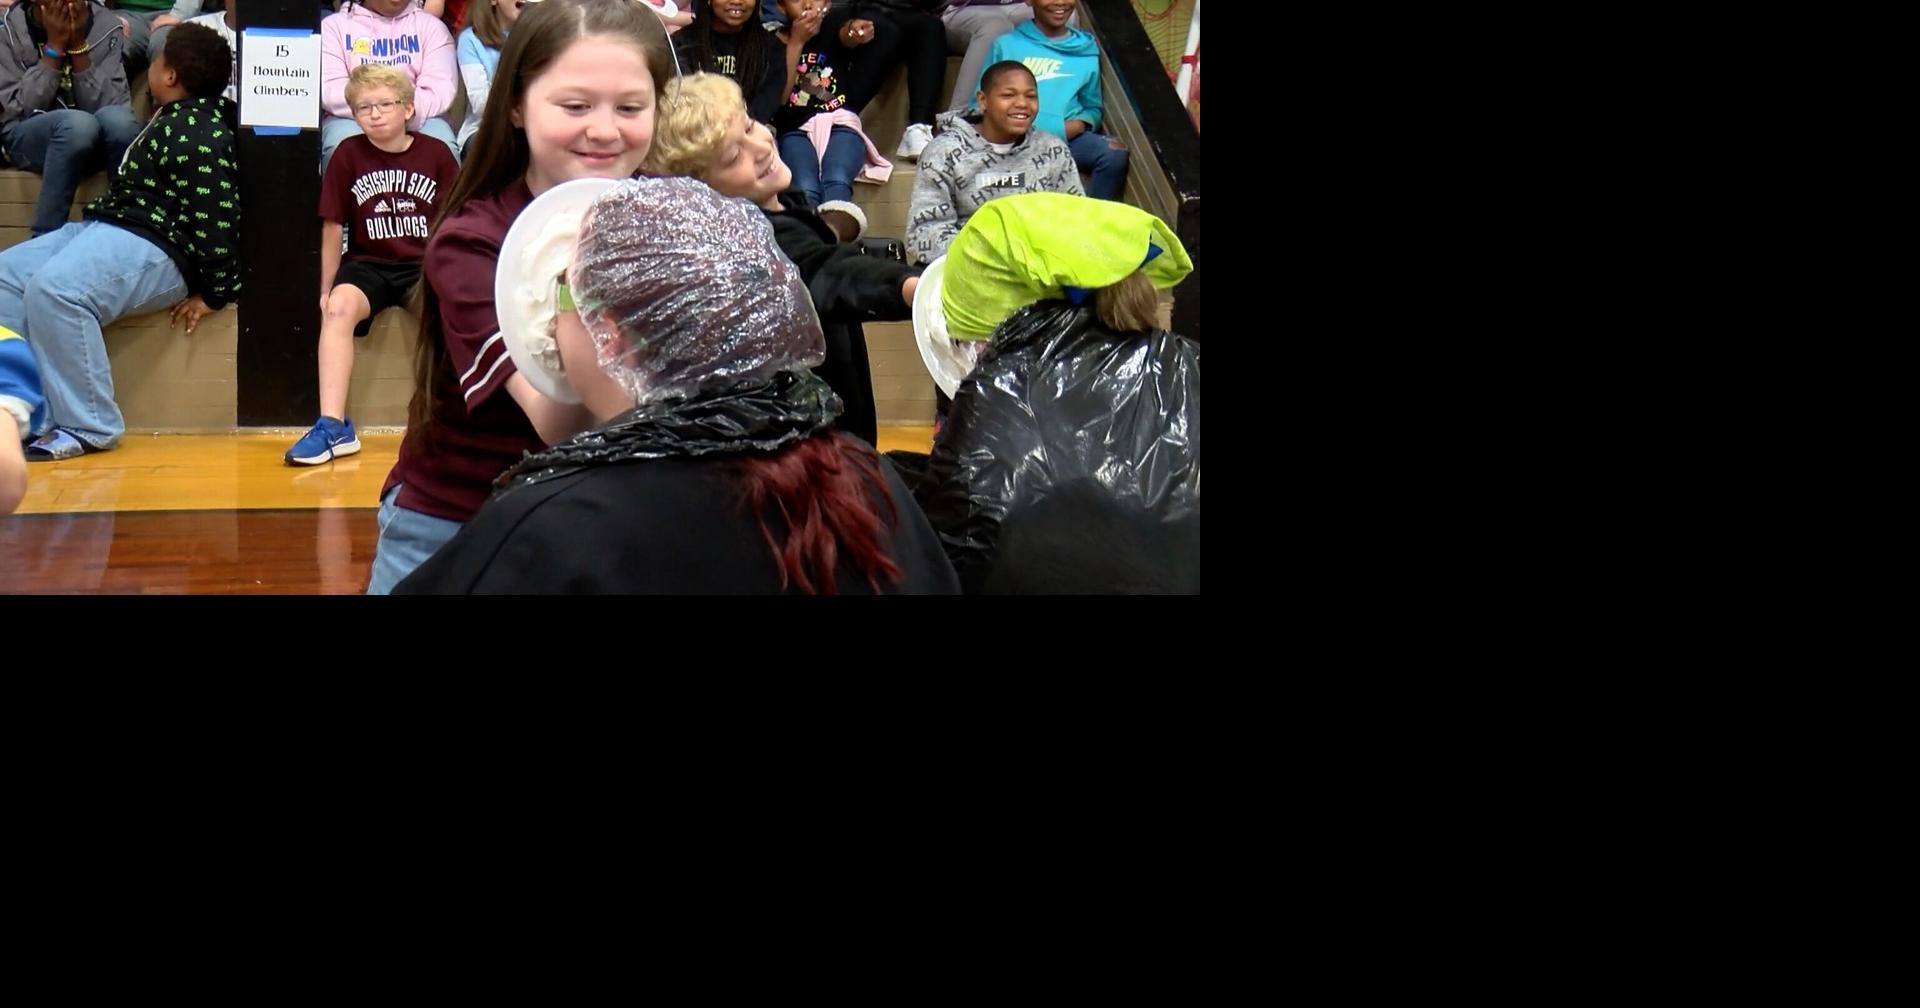 Students at Lawhon Elementary hitting teachers in the faces with pies ...